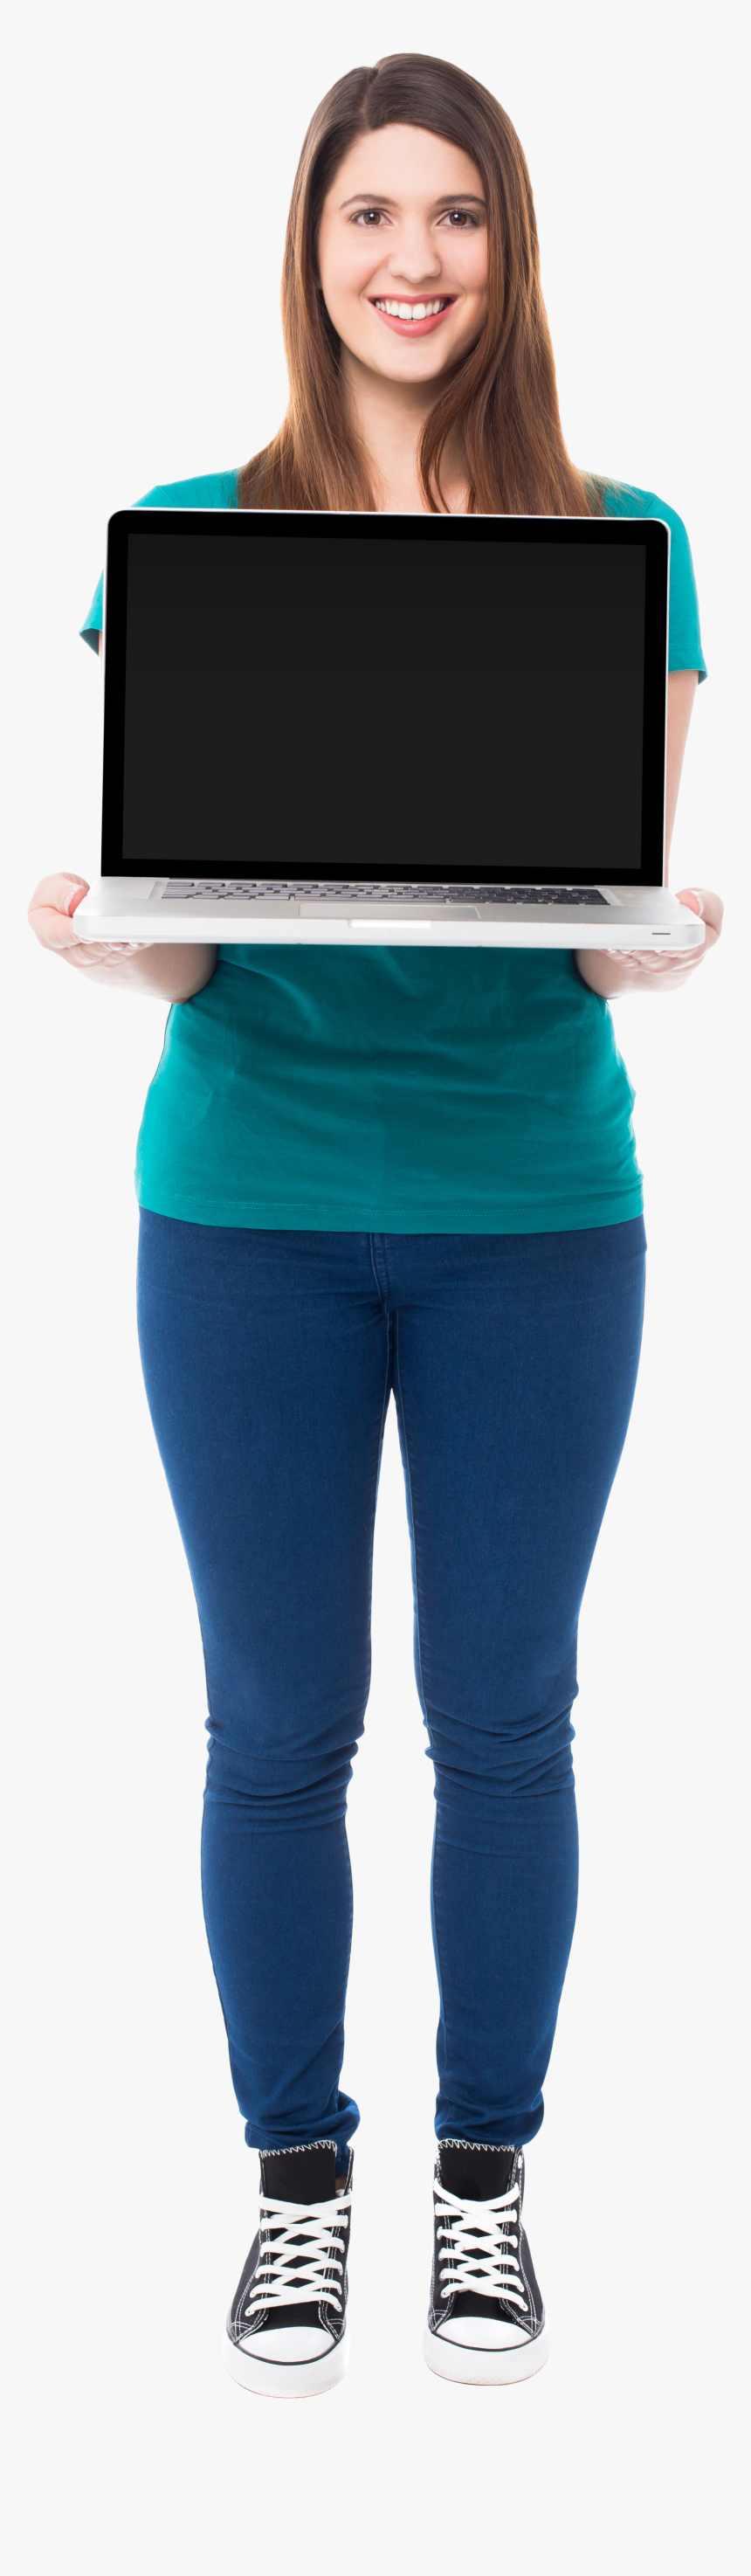 Girl With Laptop - Girl With Laptop Png, Transparent Png, Free Download